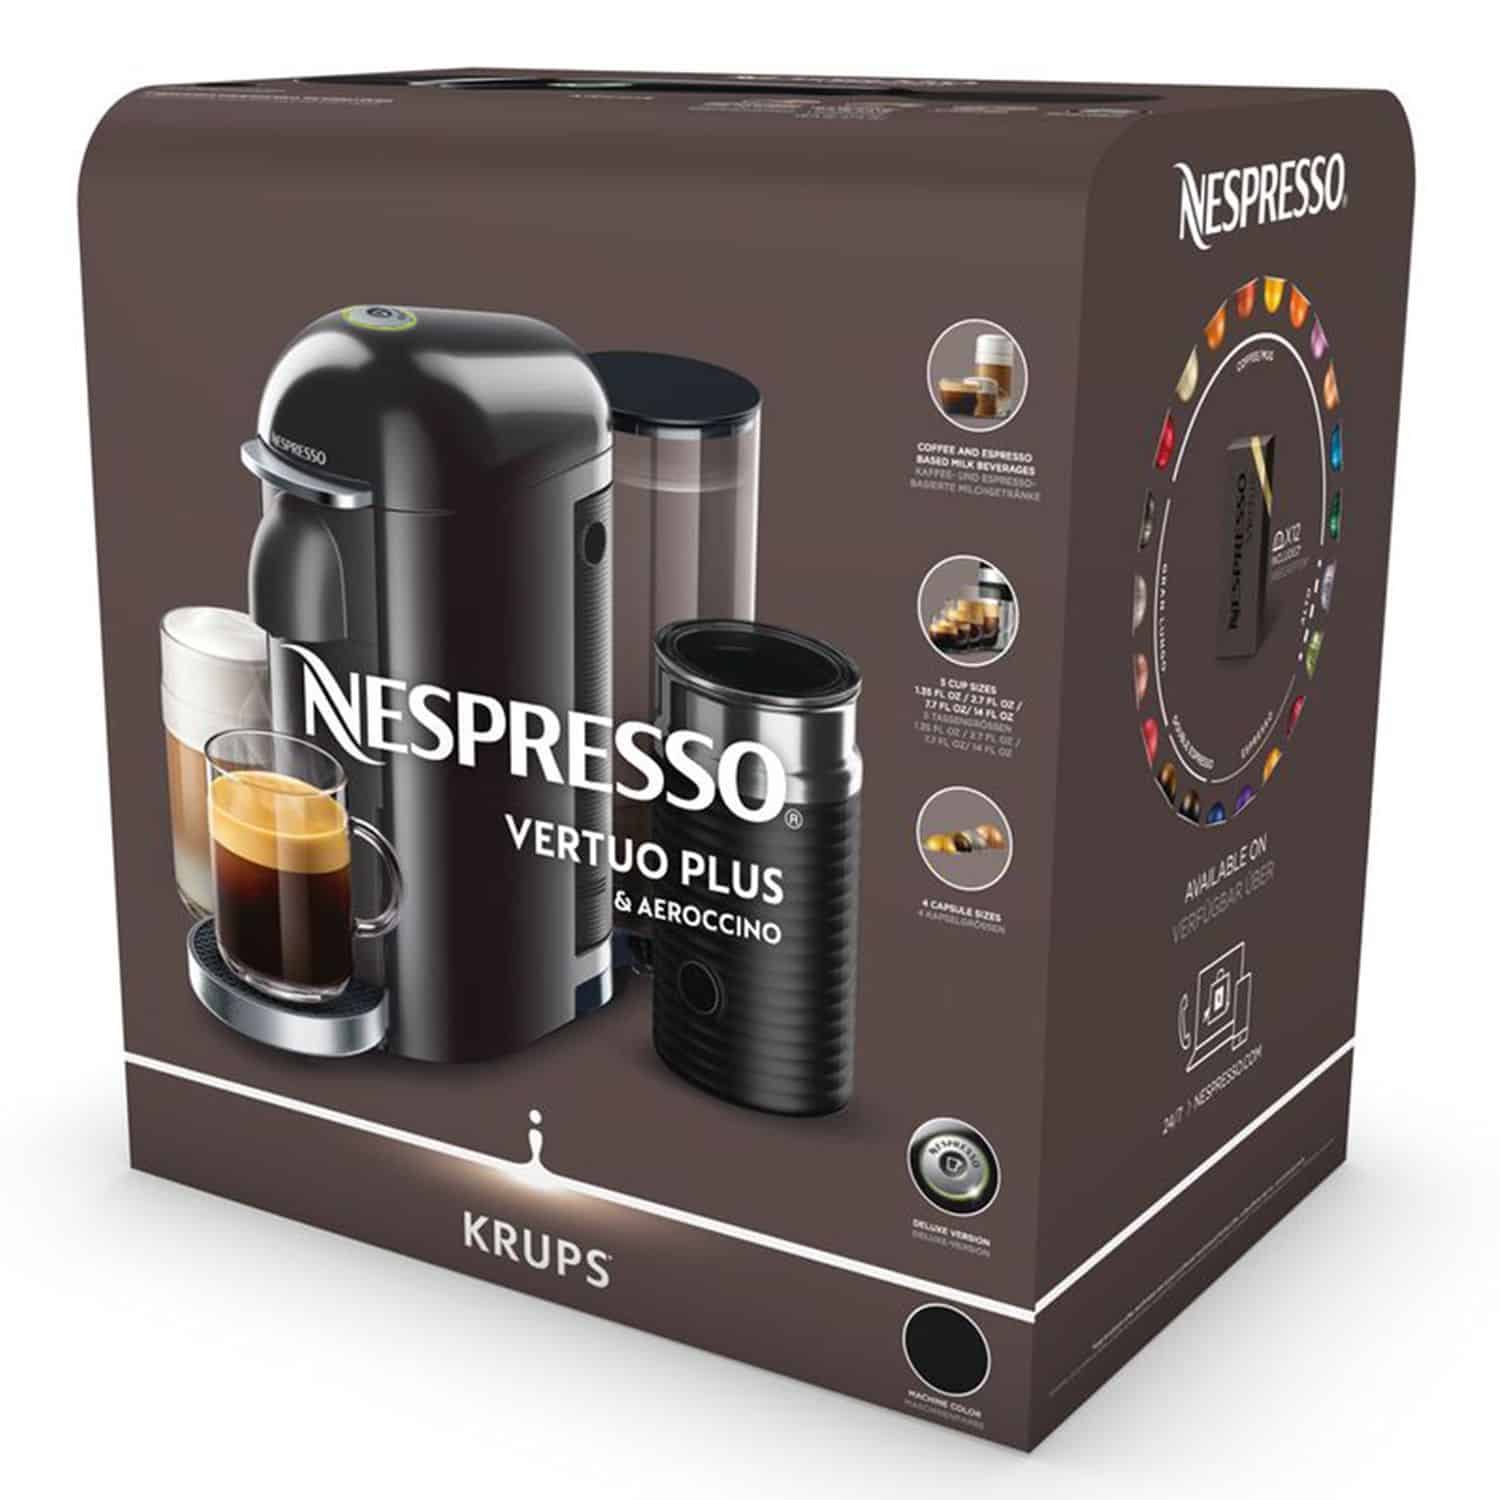 Krups Coffee Machine Nespresso Descaling Vertuo Plus On The Cheap ...